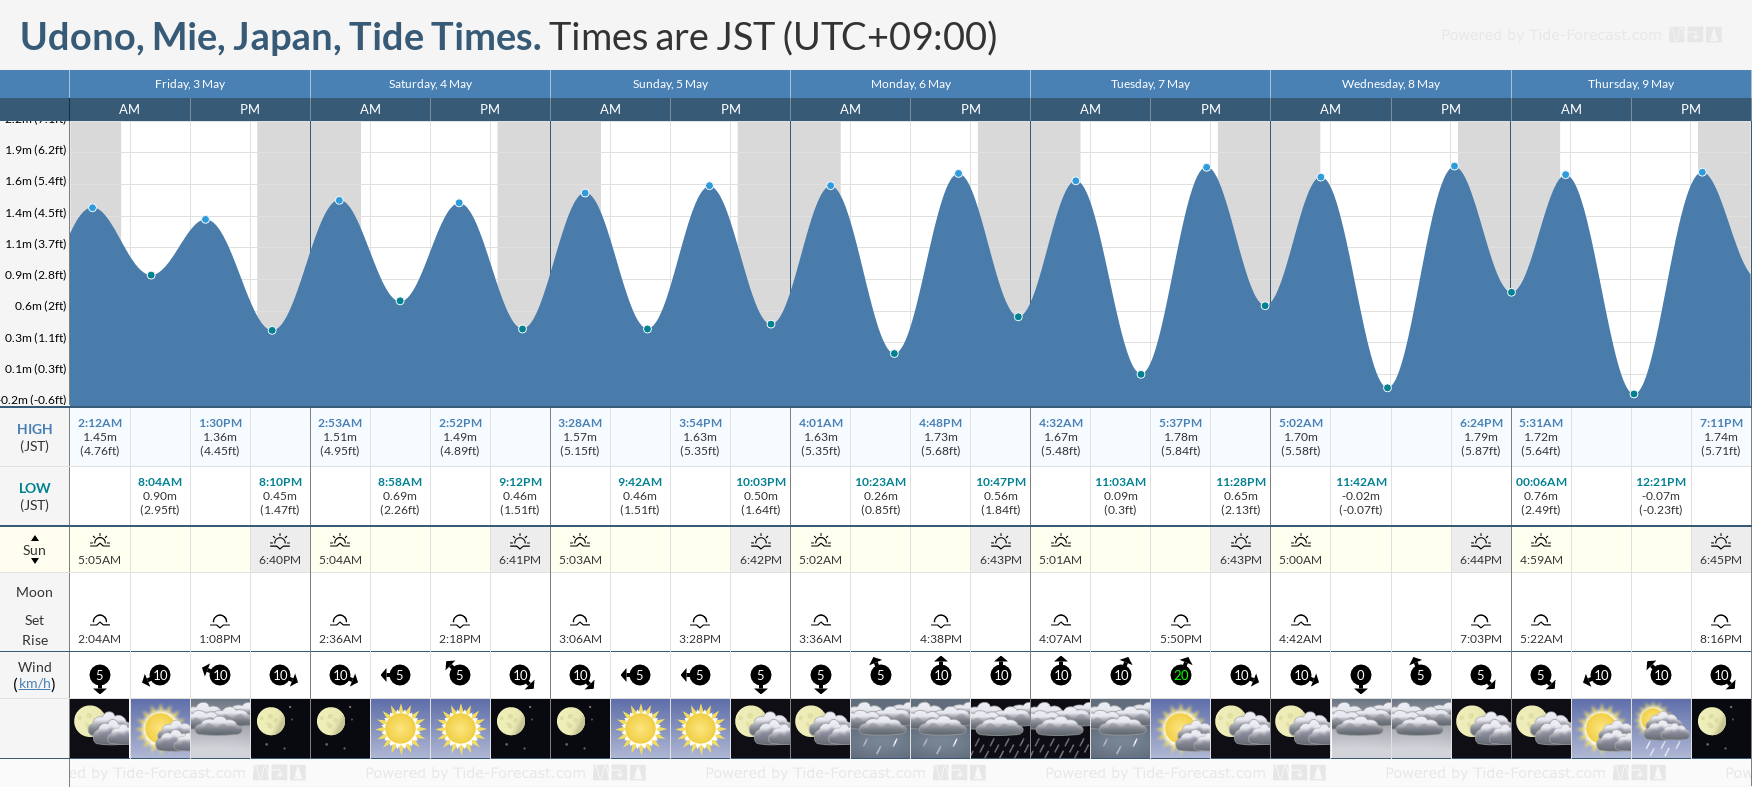 Udono, Mie, Japan Tide Chart including high and low tide tide times for the next 7 days